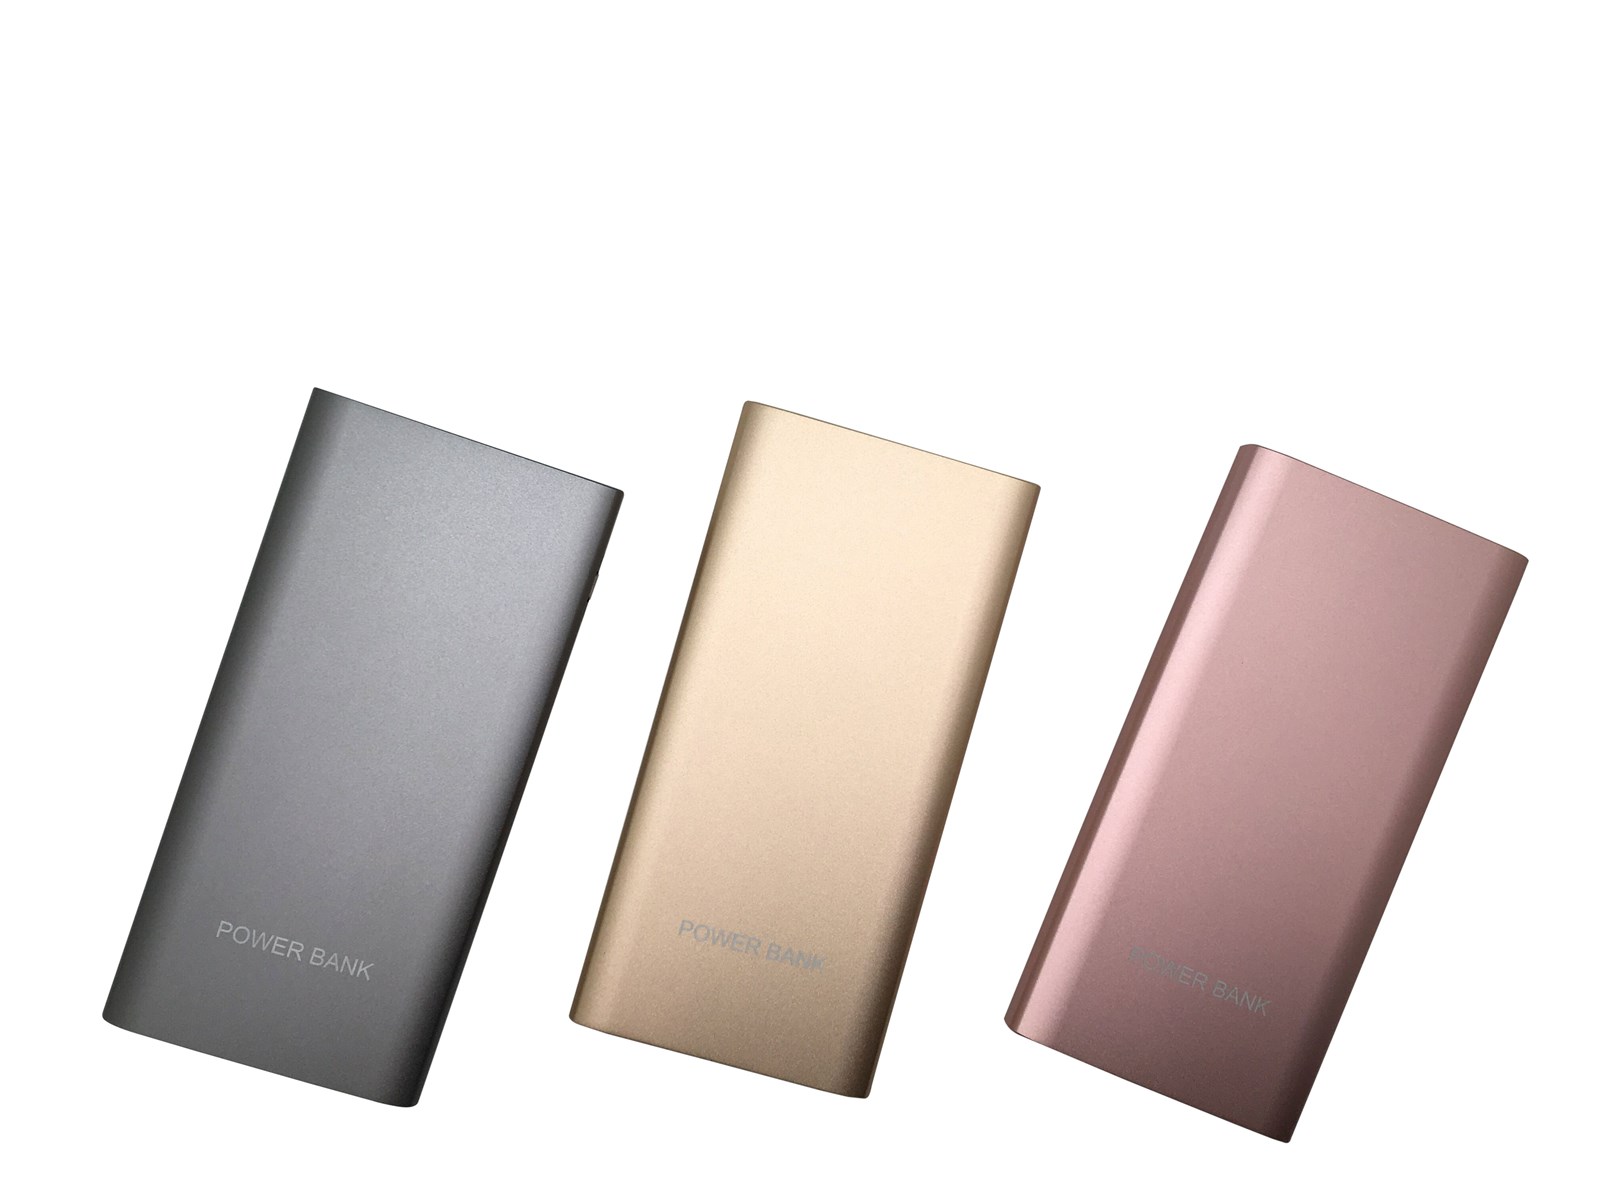 Bussiness stylish portable large powerbank 10000mah oppo mobile phone power bank